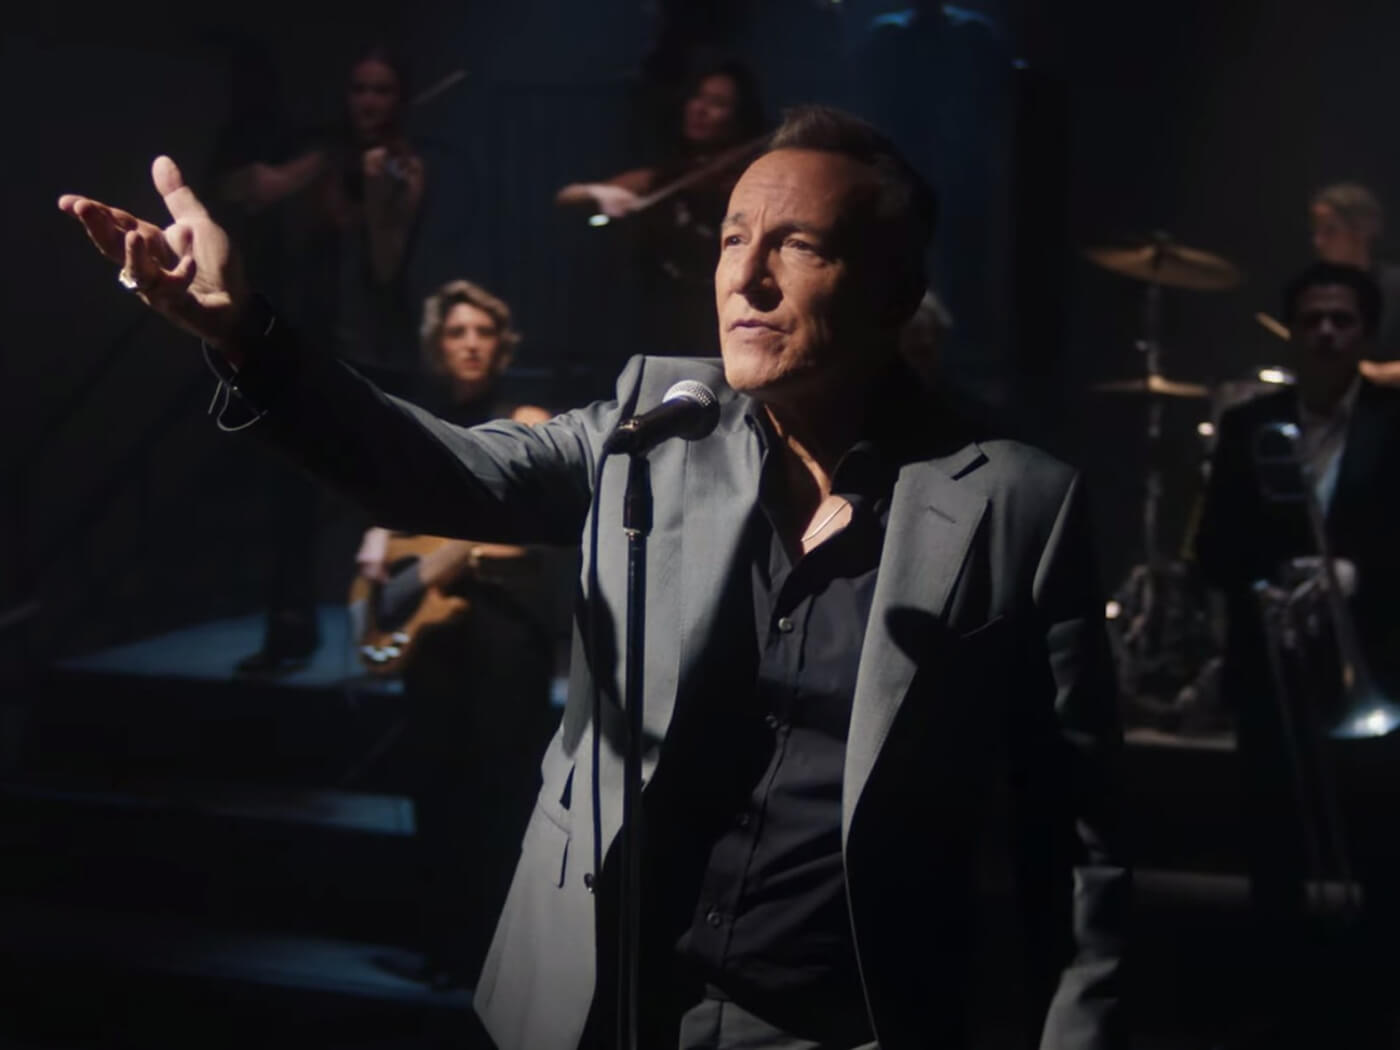 Listen to Bruce Springsteen’s new cover of Commodores’ “Nightshift”